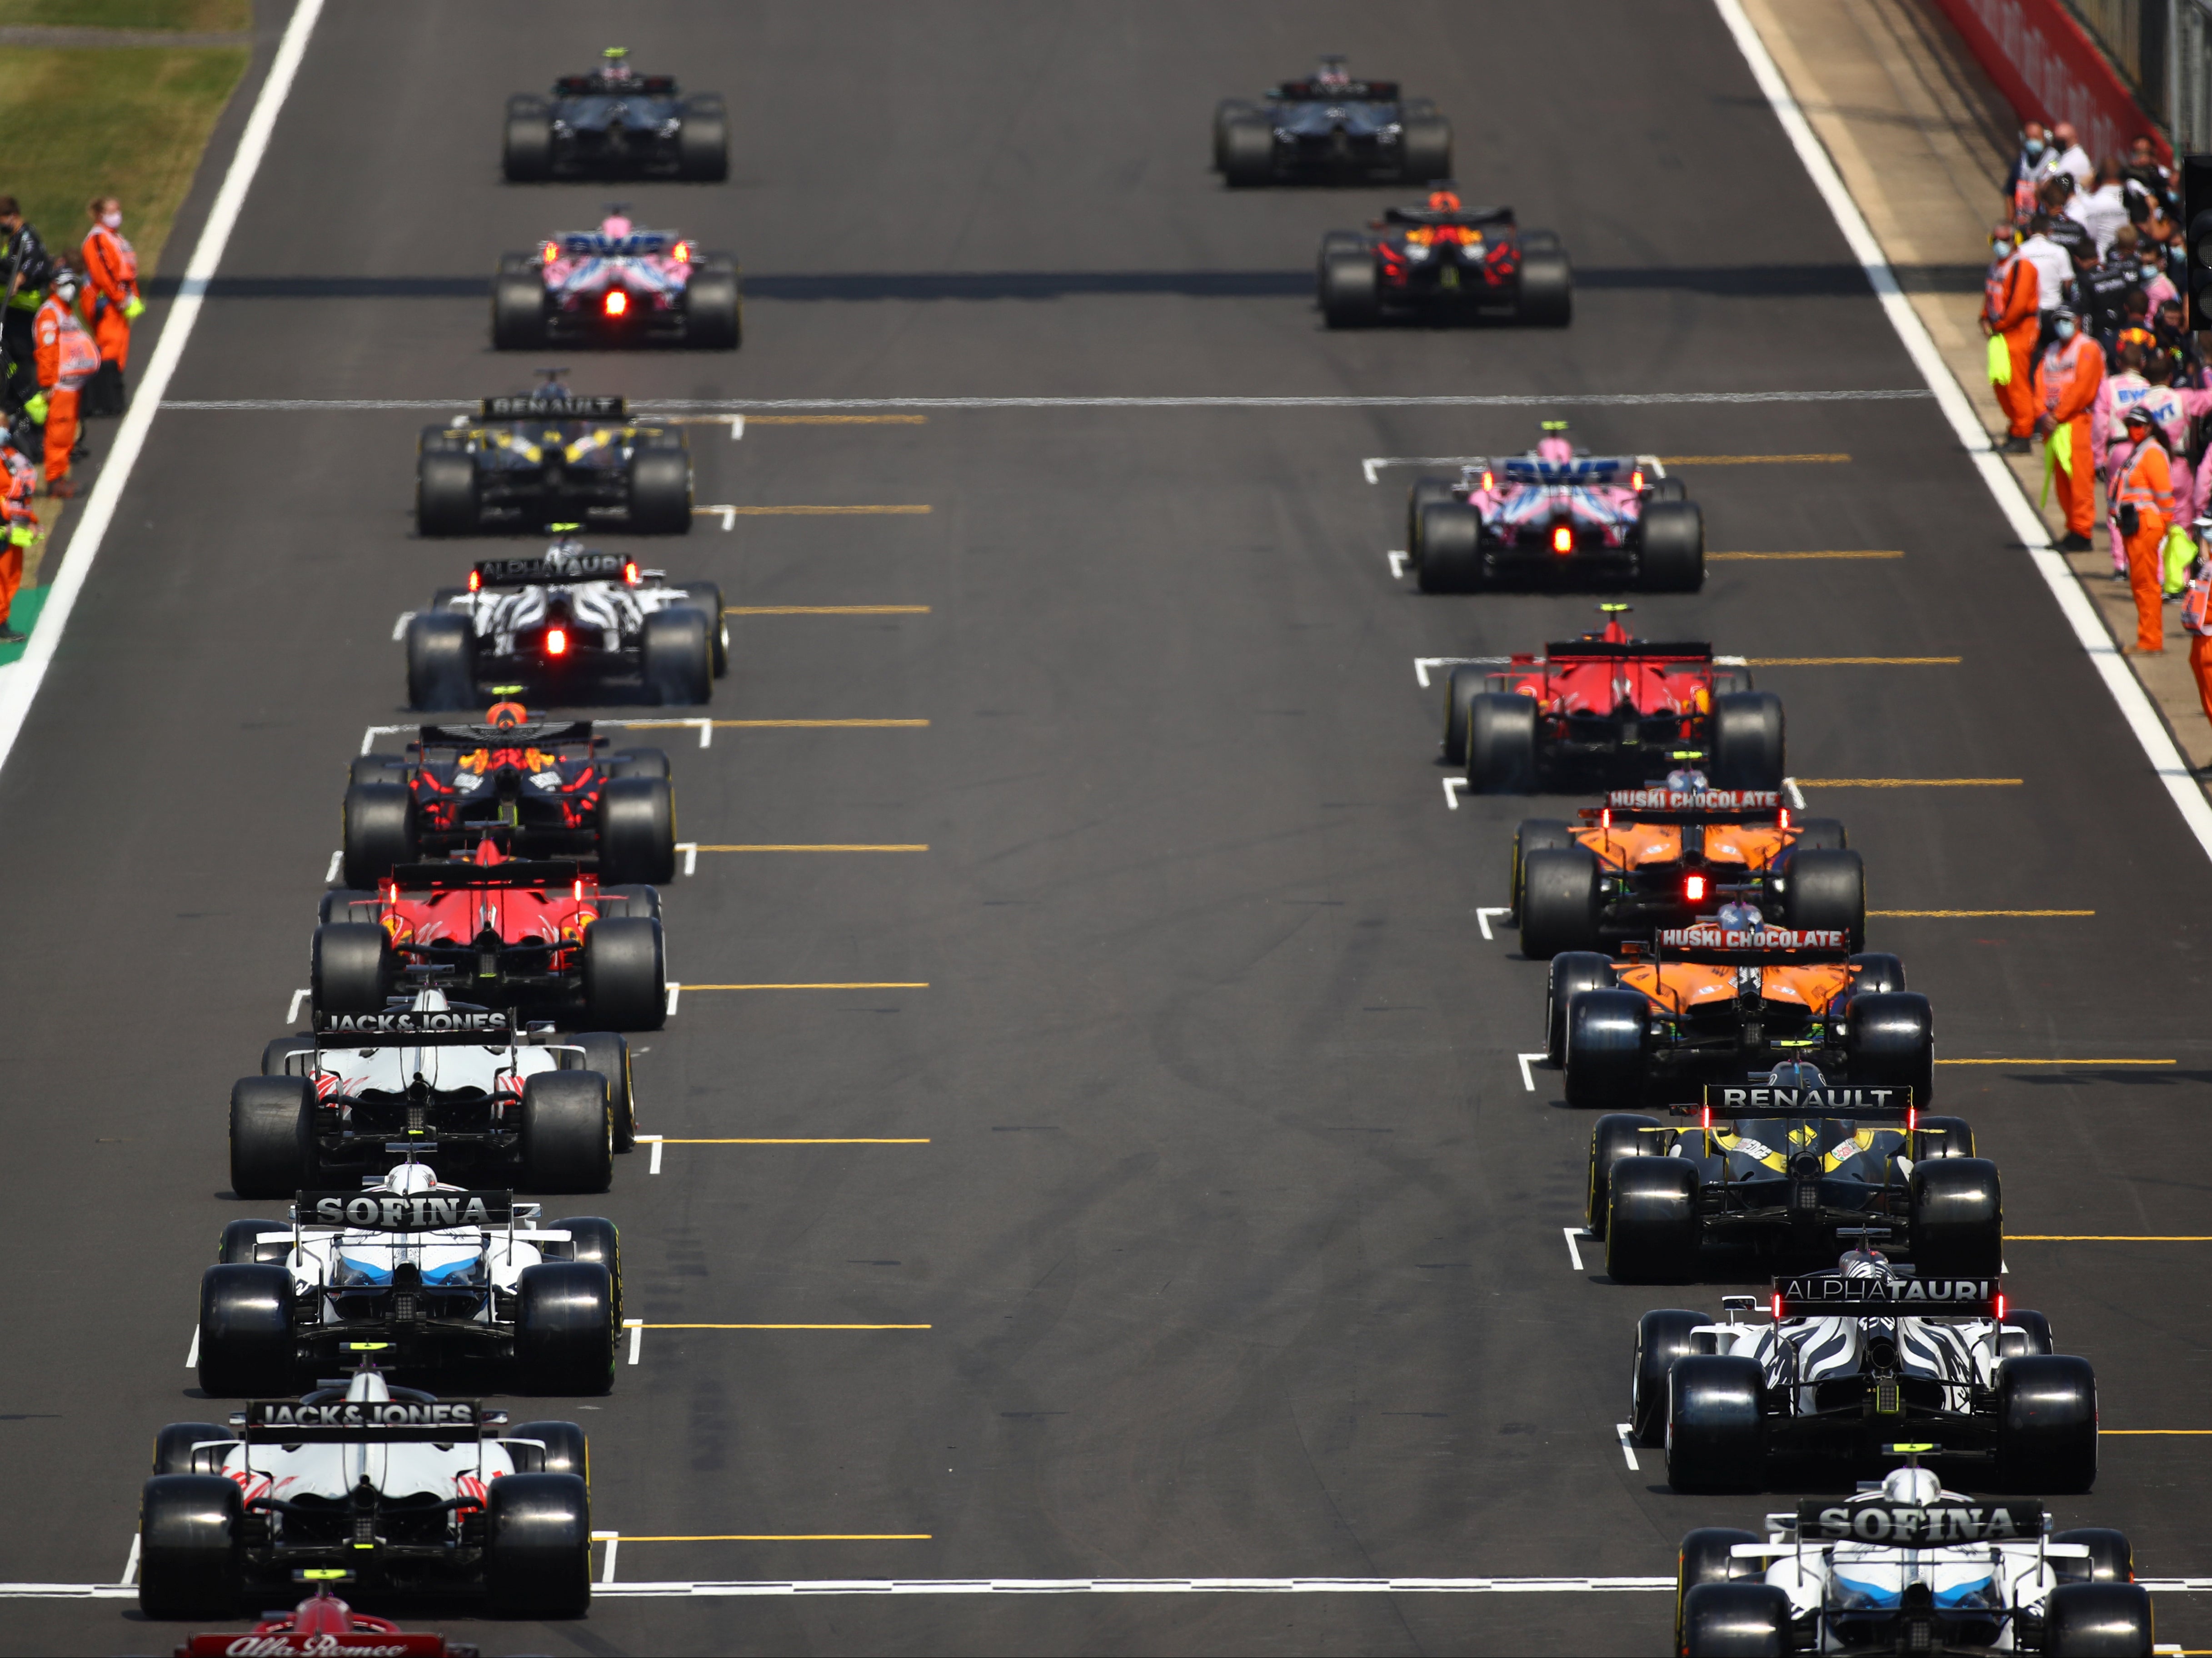 A general view of the grid at Silverstone